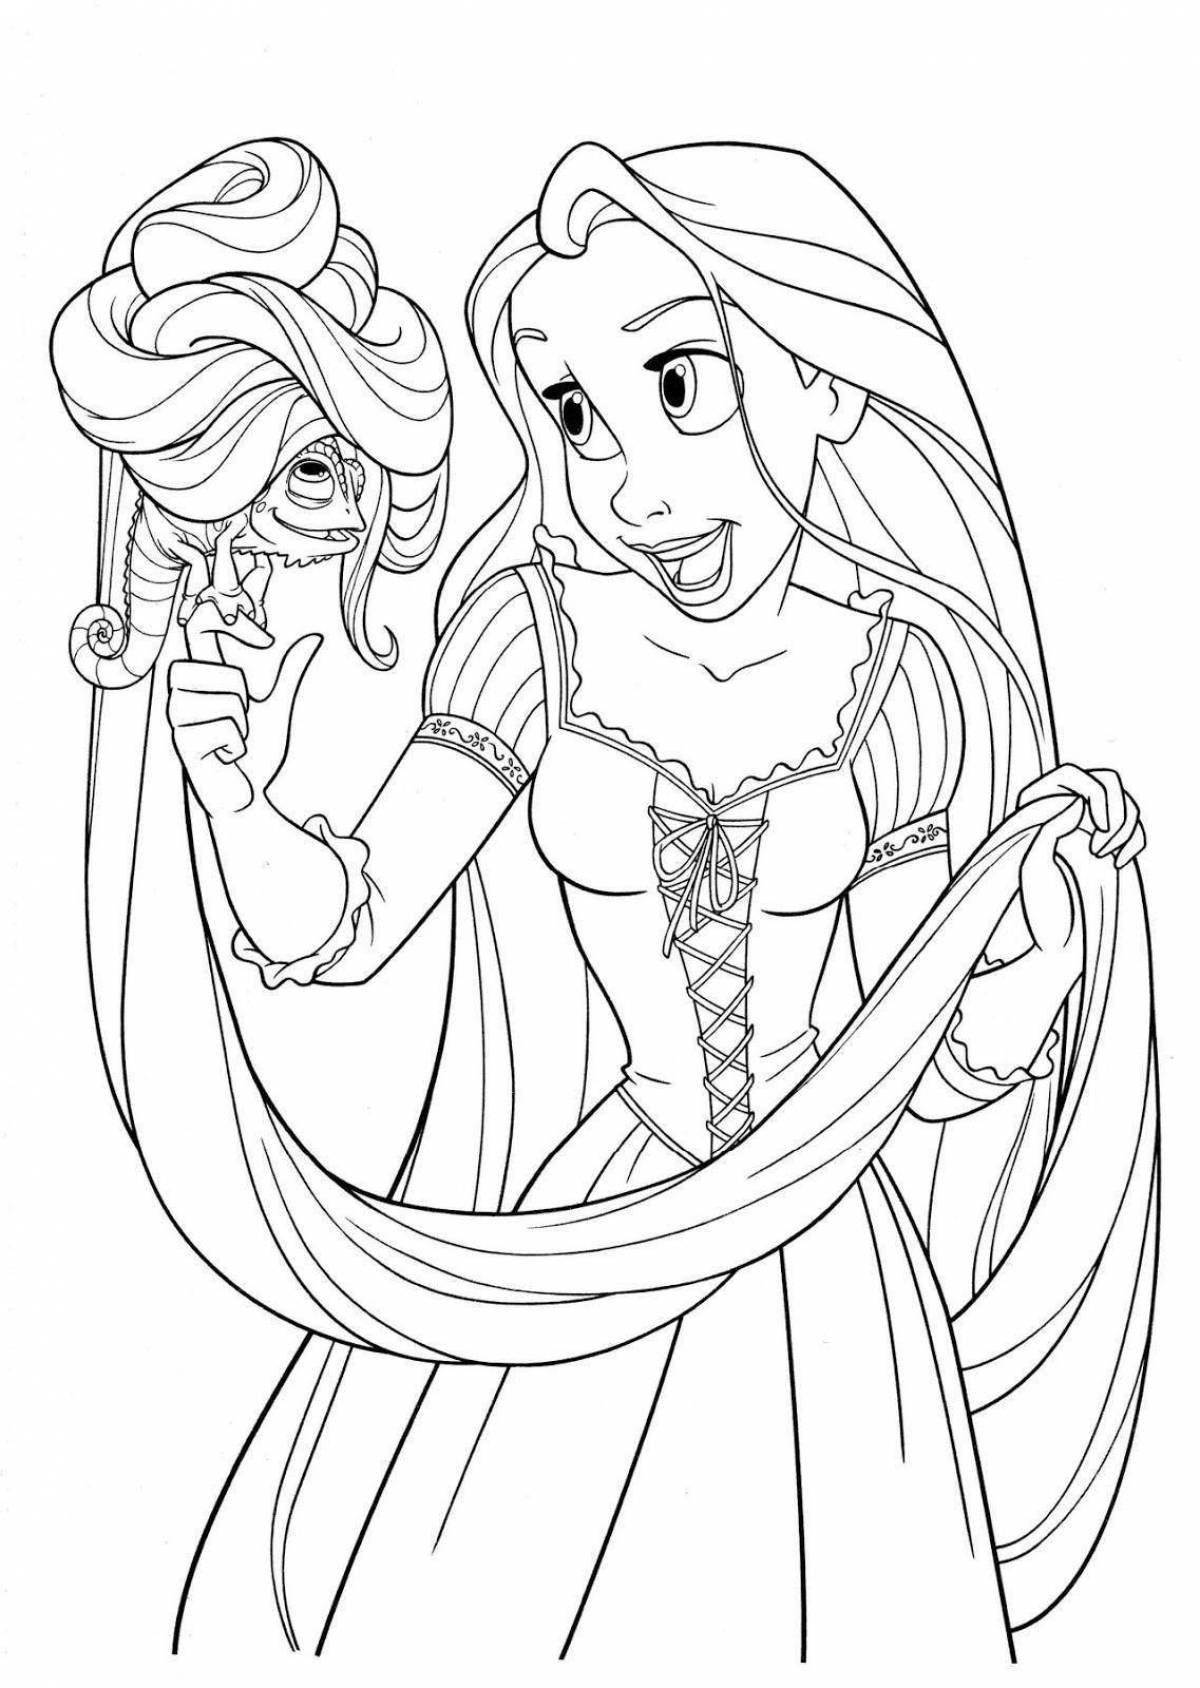 Adorable Rapunzel coloring book for girls